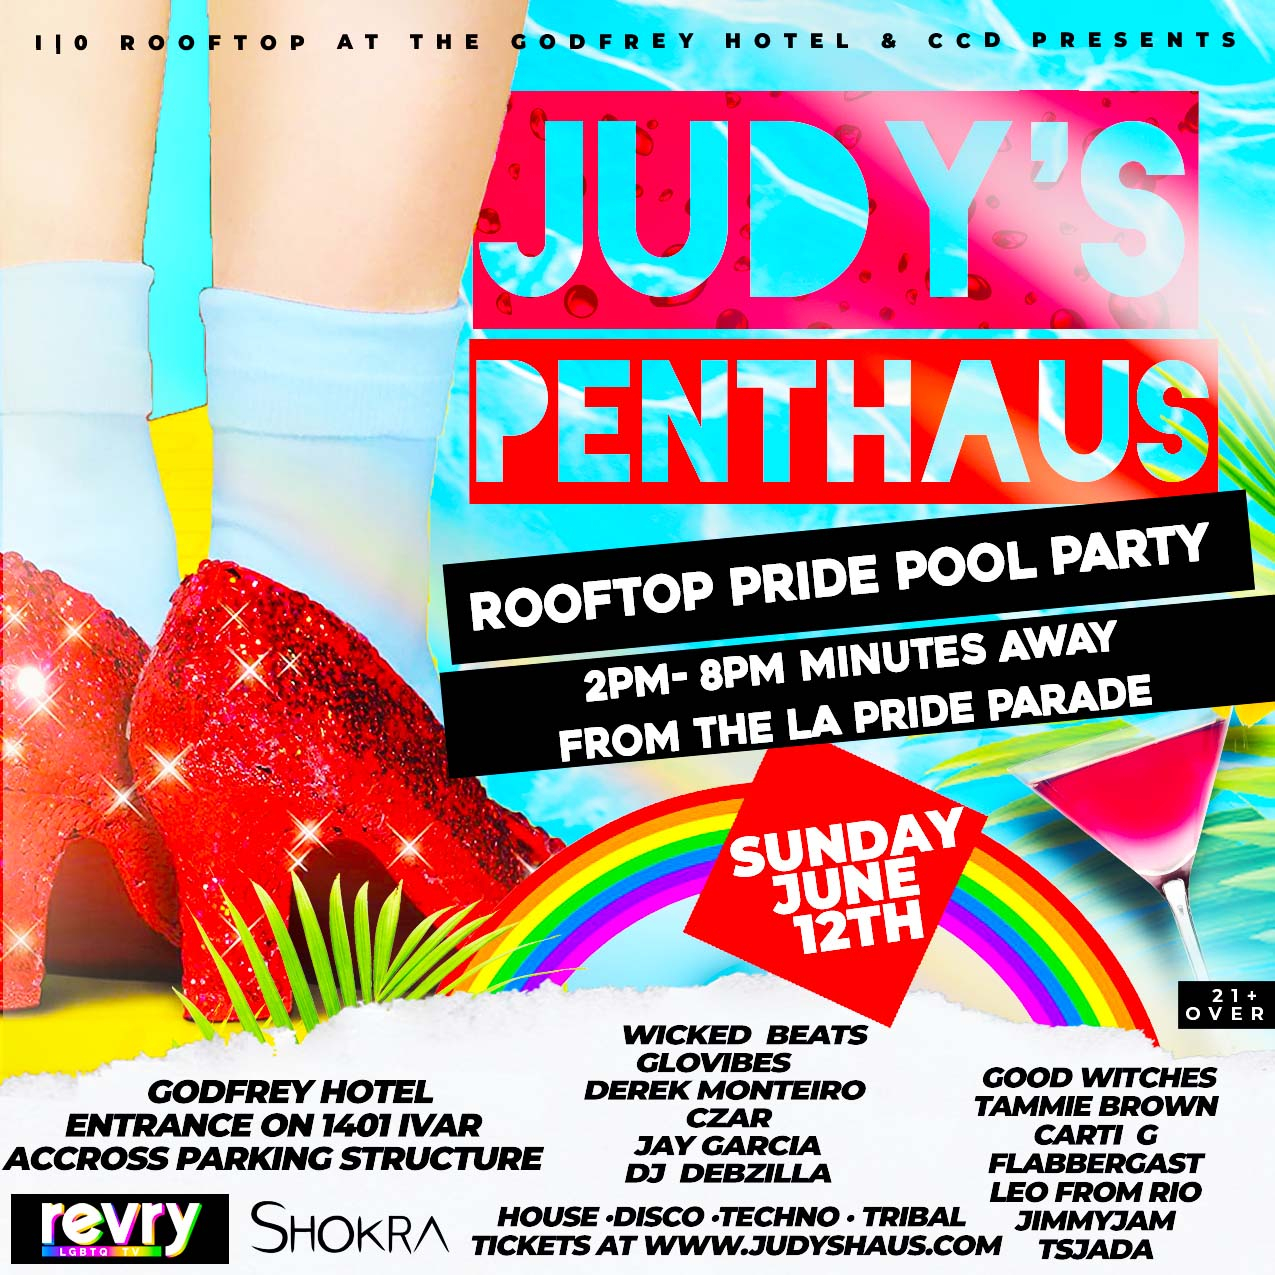 Judy's PentHaus Rooftop Pride Pool Party - Flyer front